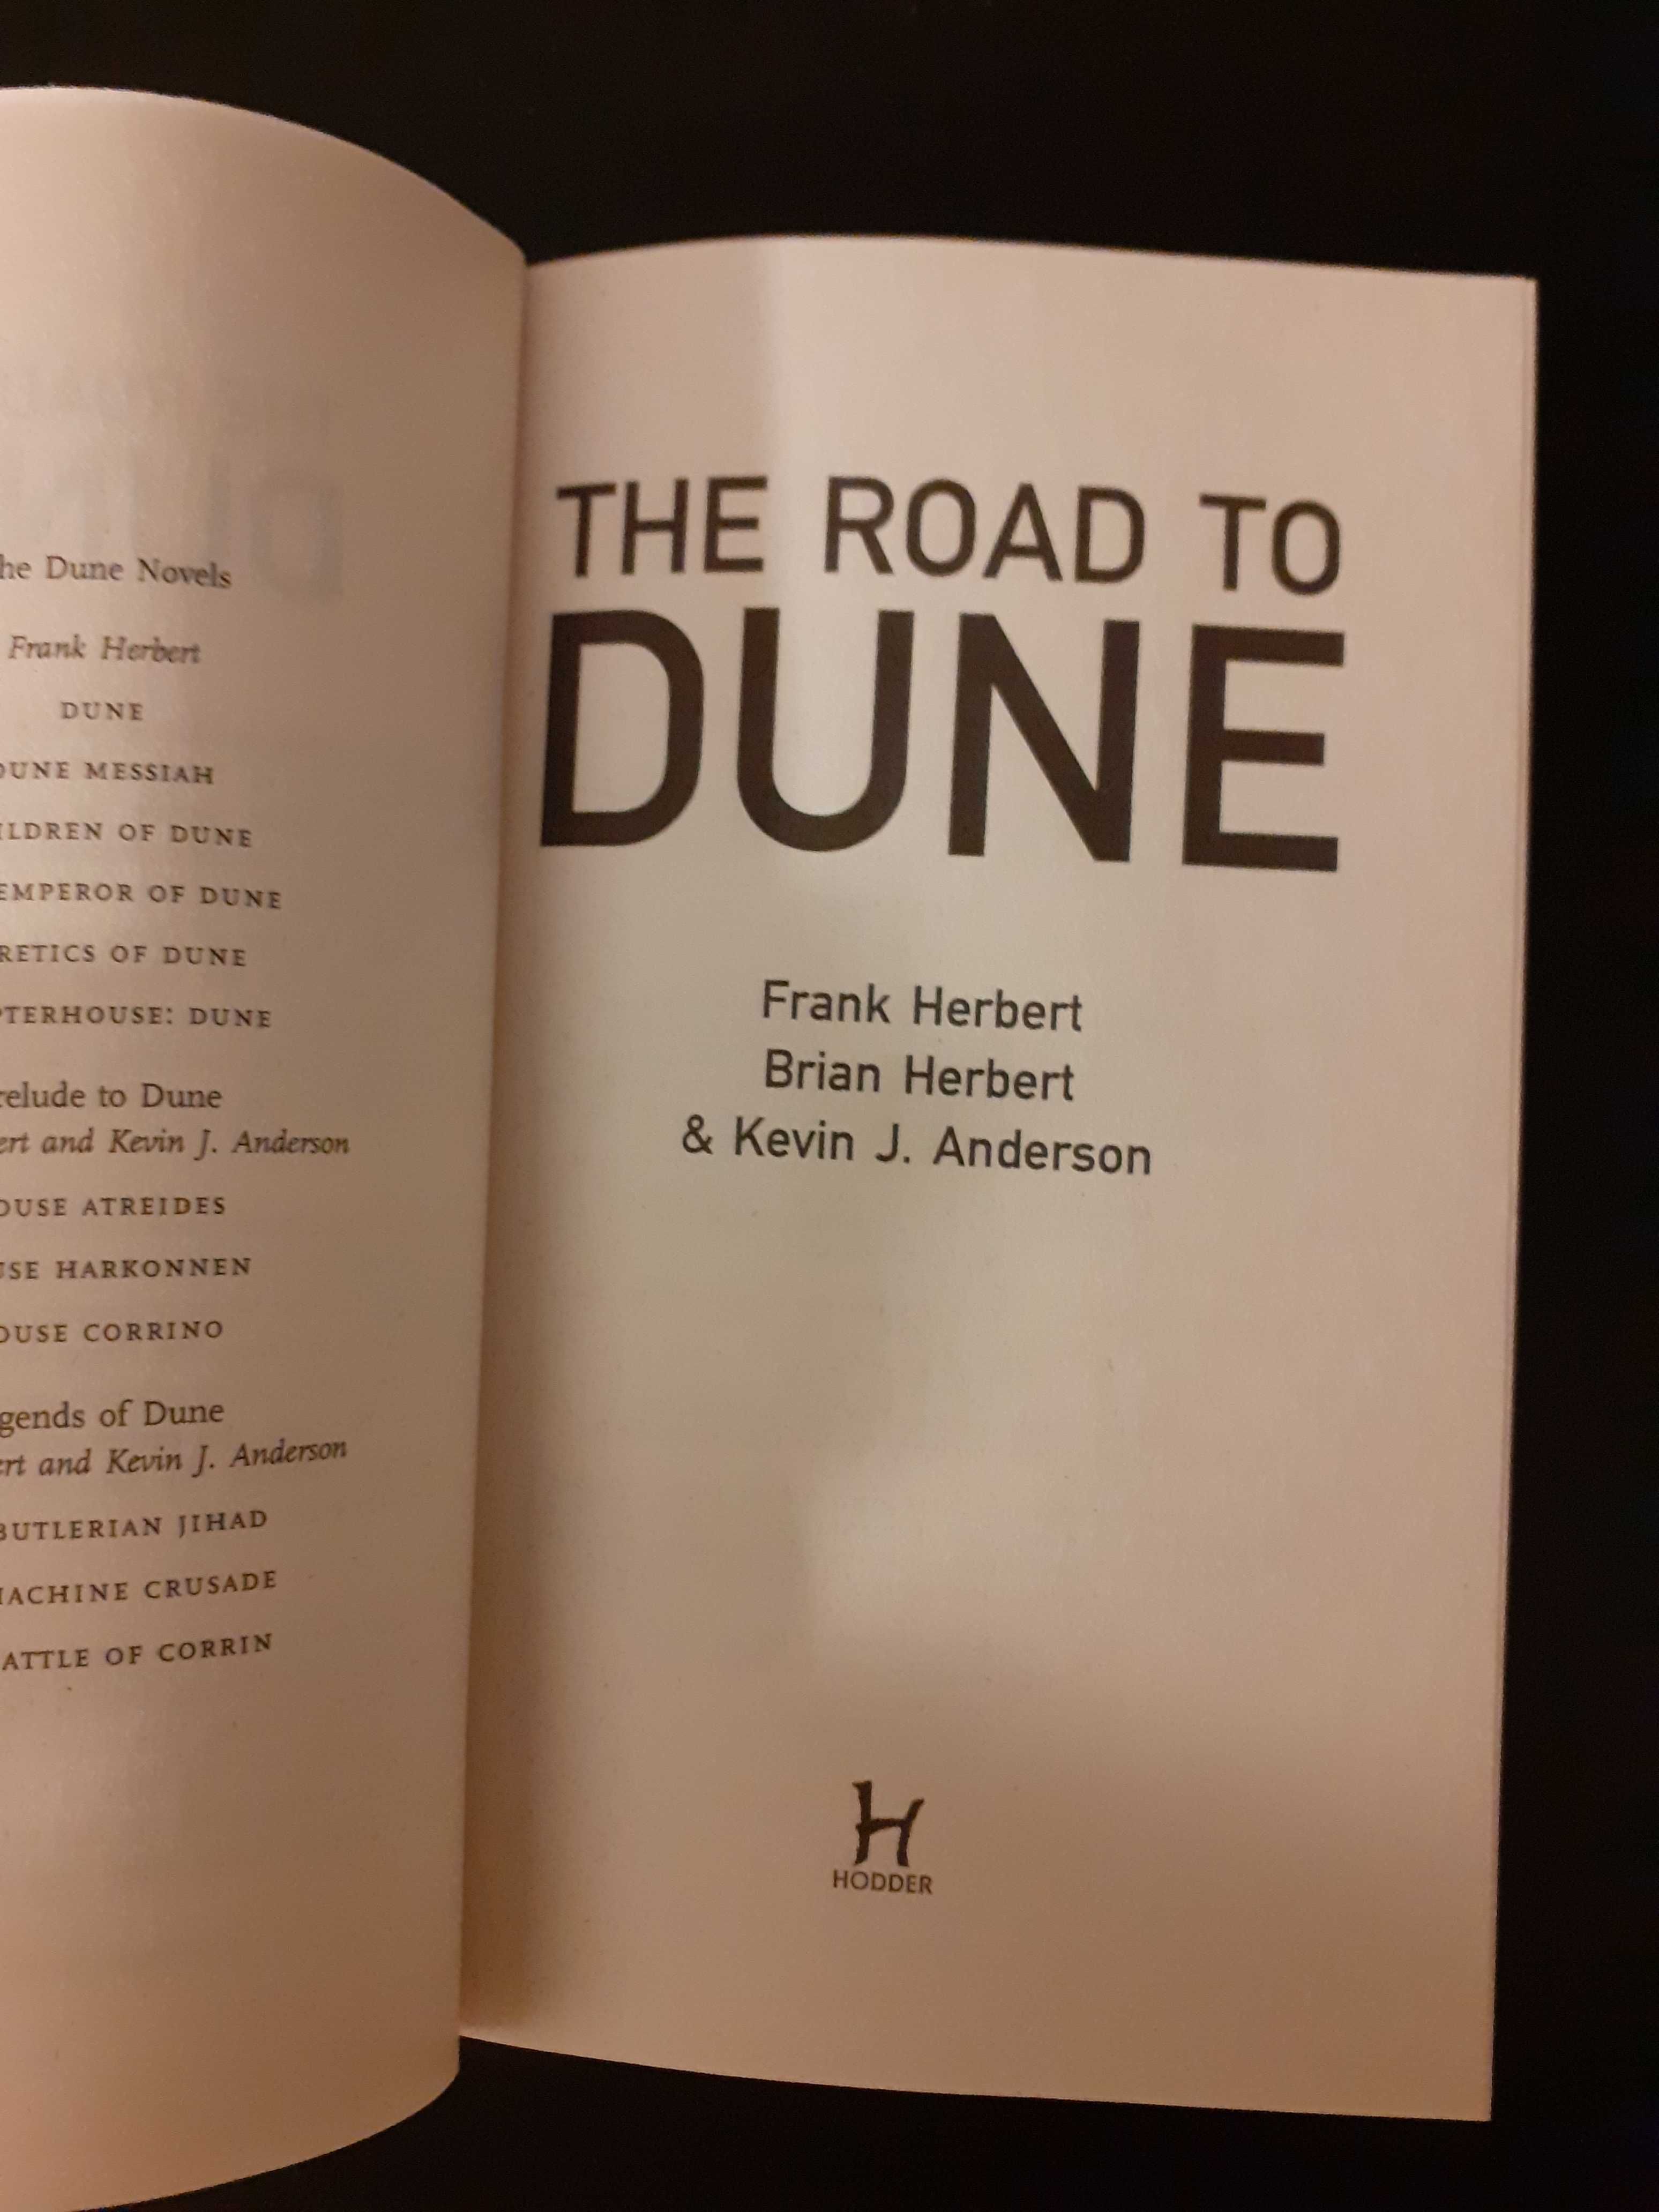 The Road to Dune: New stories (science fiction)